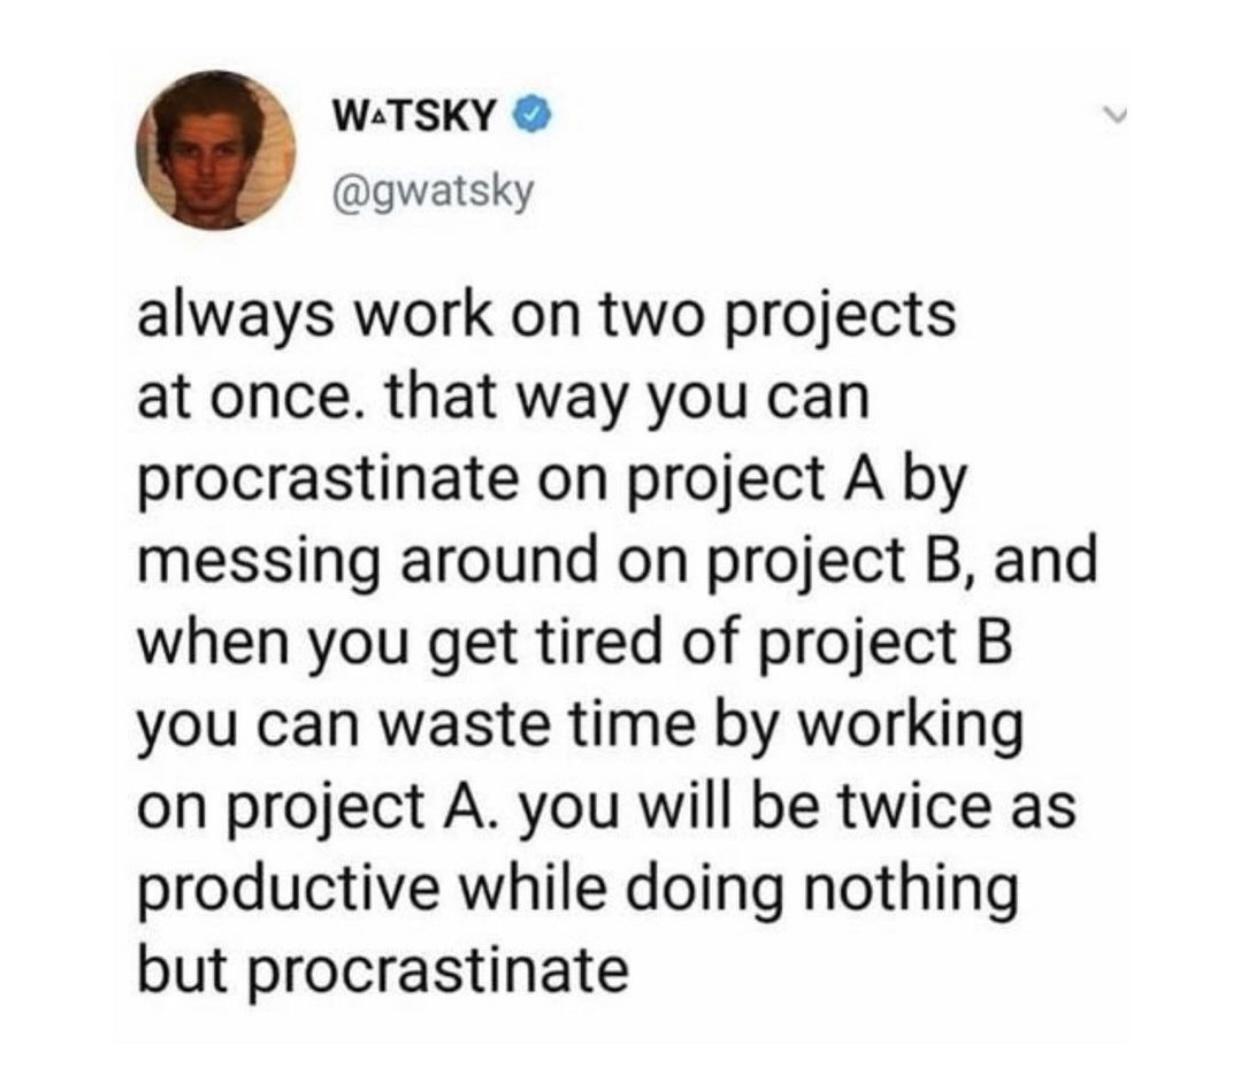 document - Watsky always work on two projects at once. that way you can procrastinate on project A by messing around on project B, and when you get tired of project B you can waste time by working on project A. you will be twice as productive while doing 